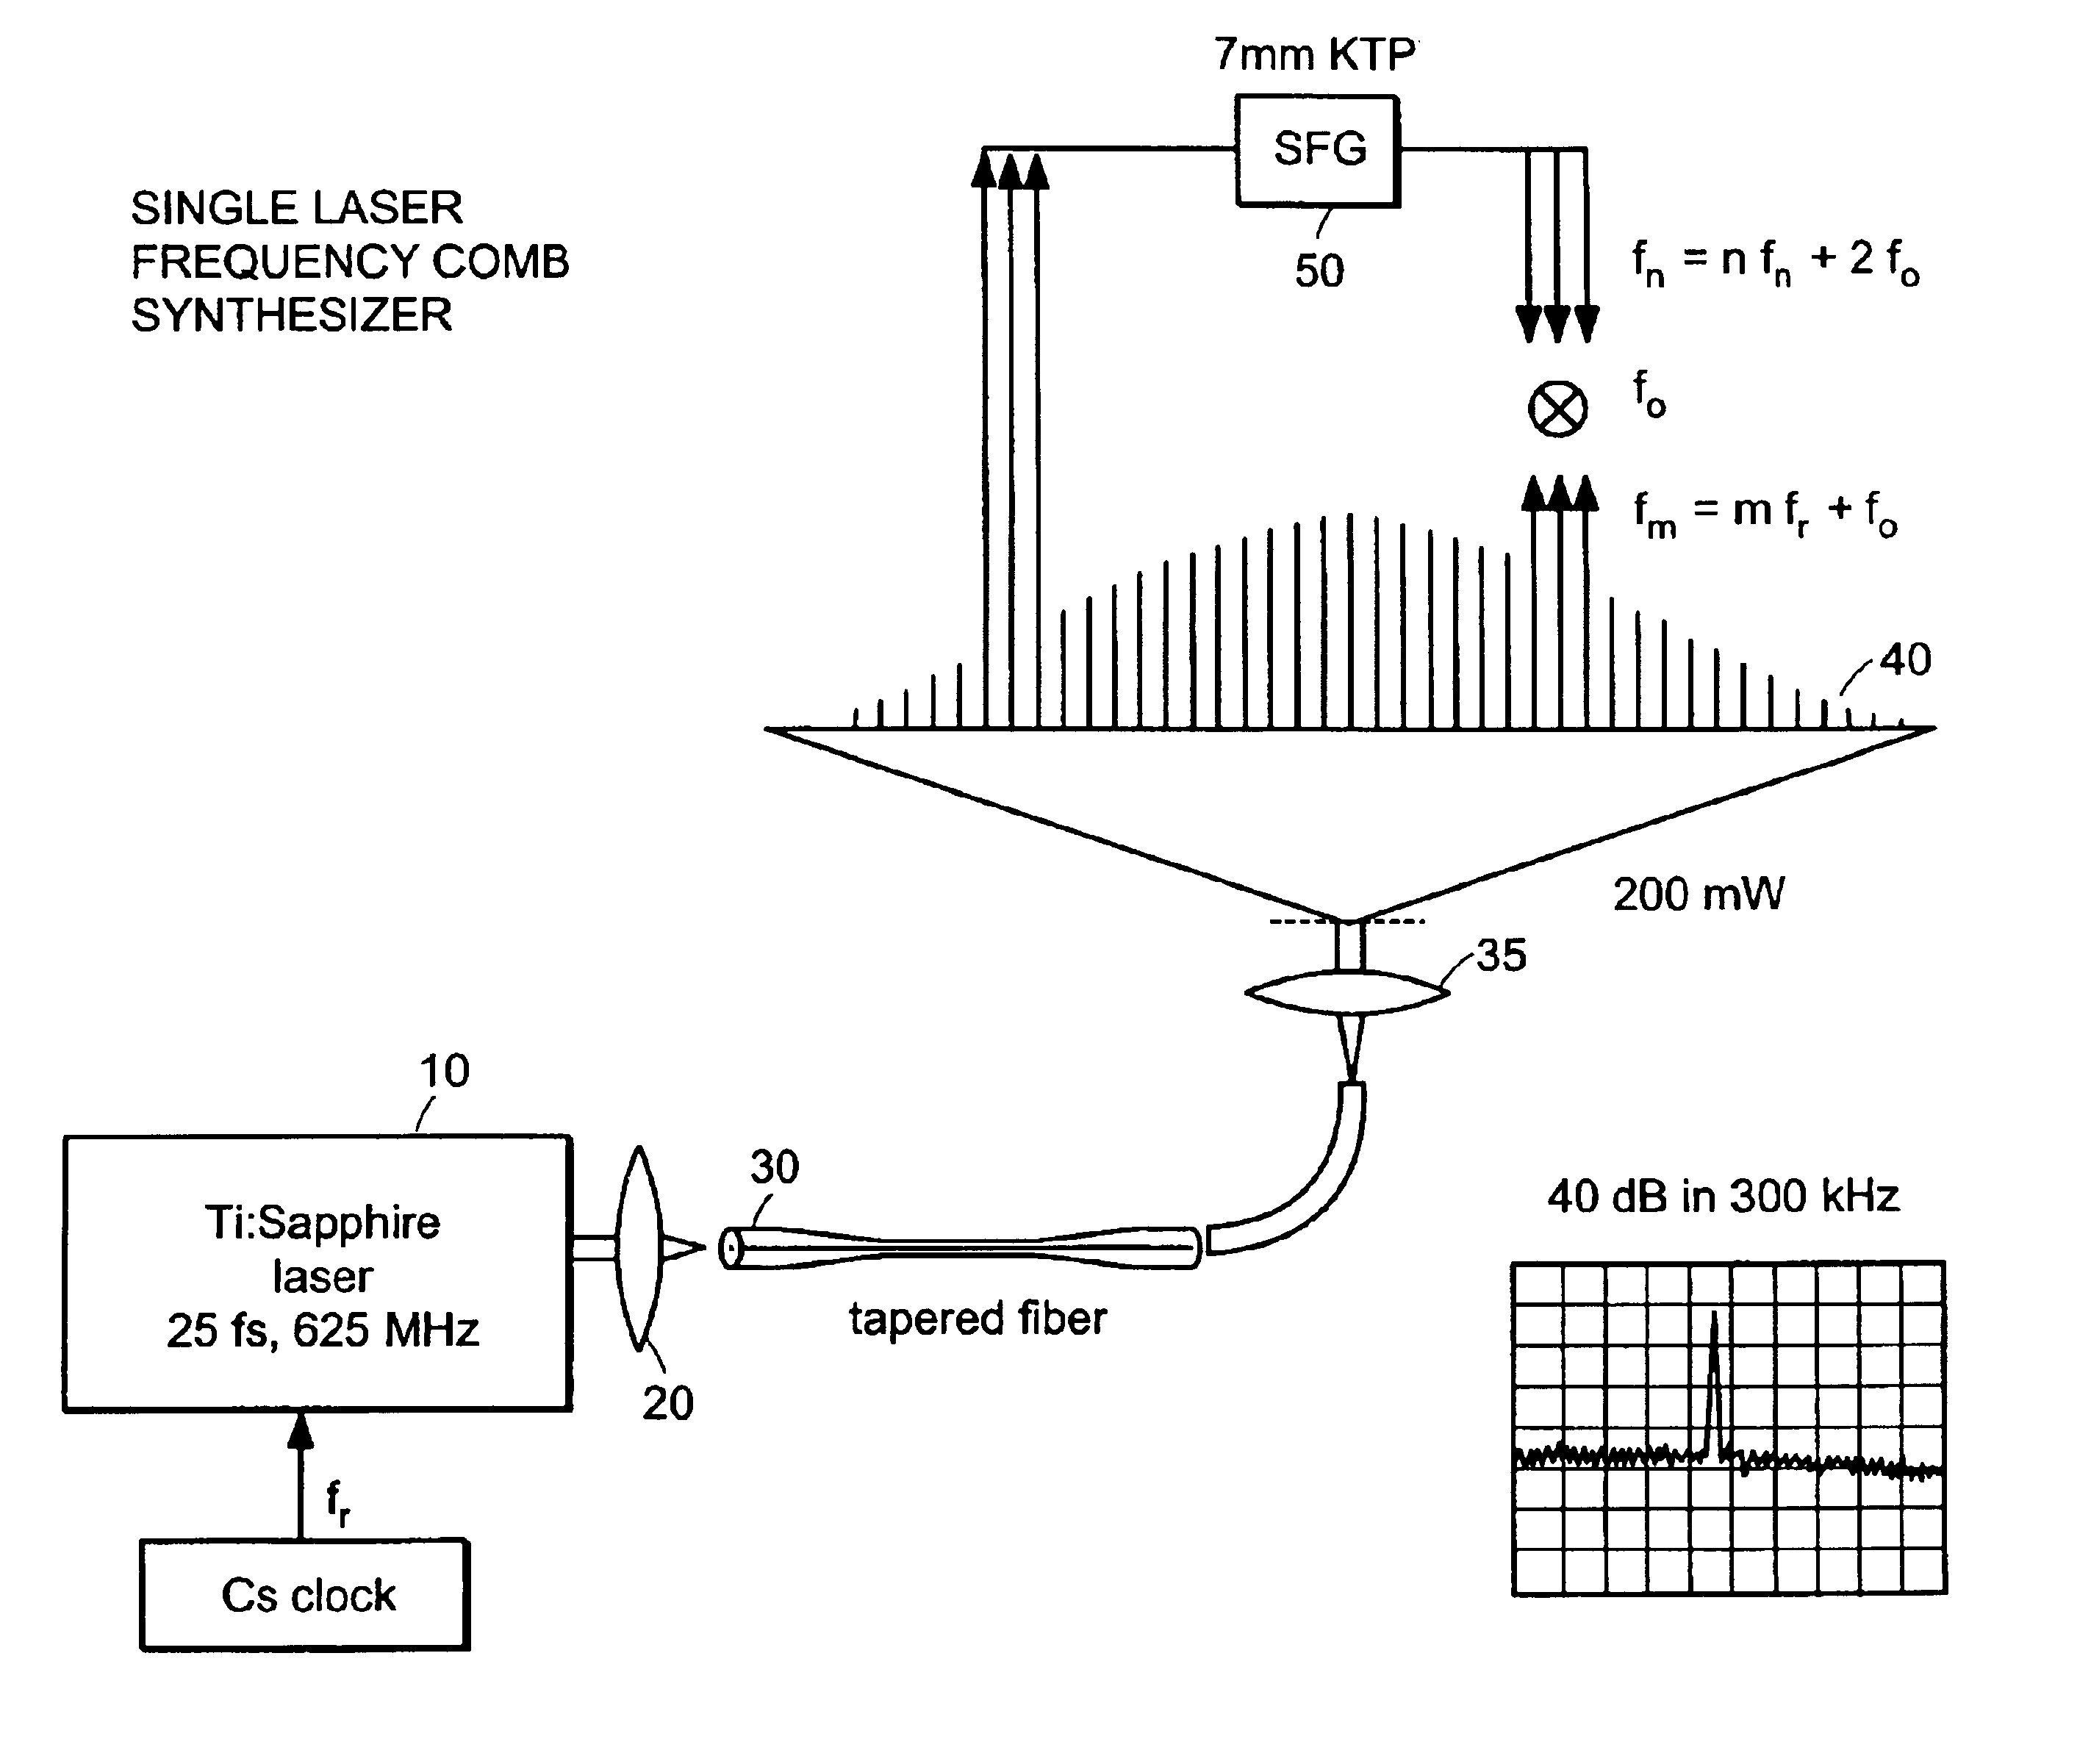 Frequency comb analysis